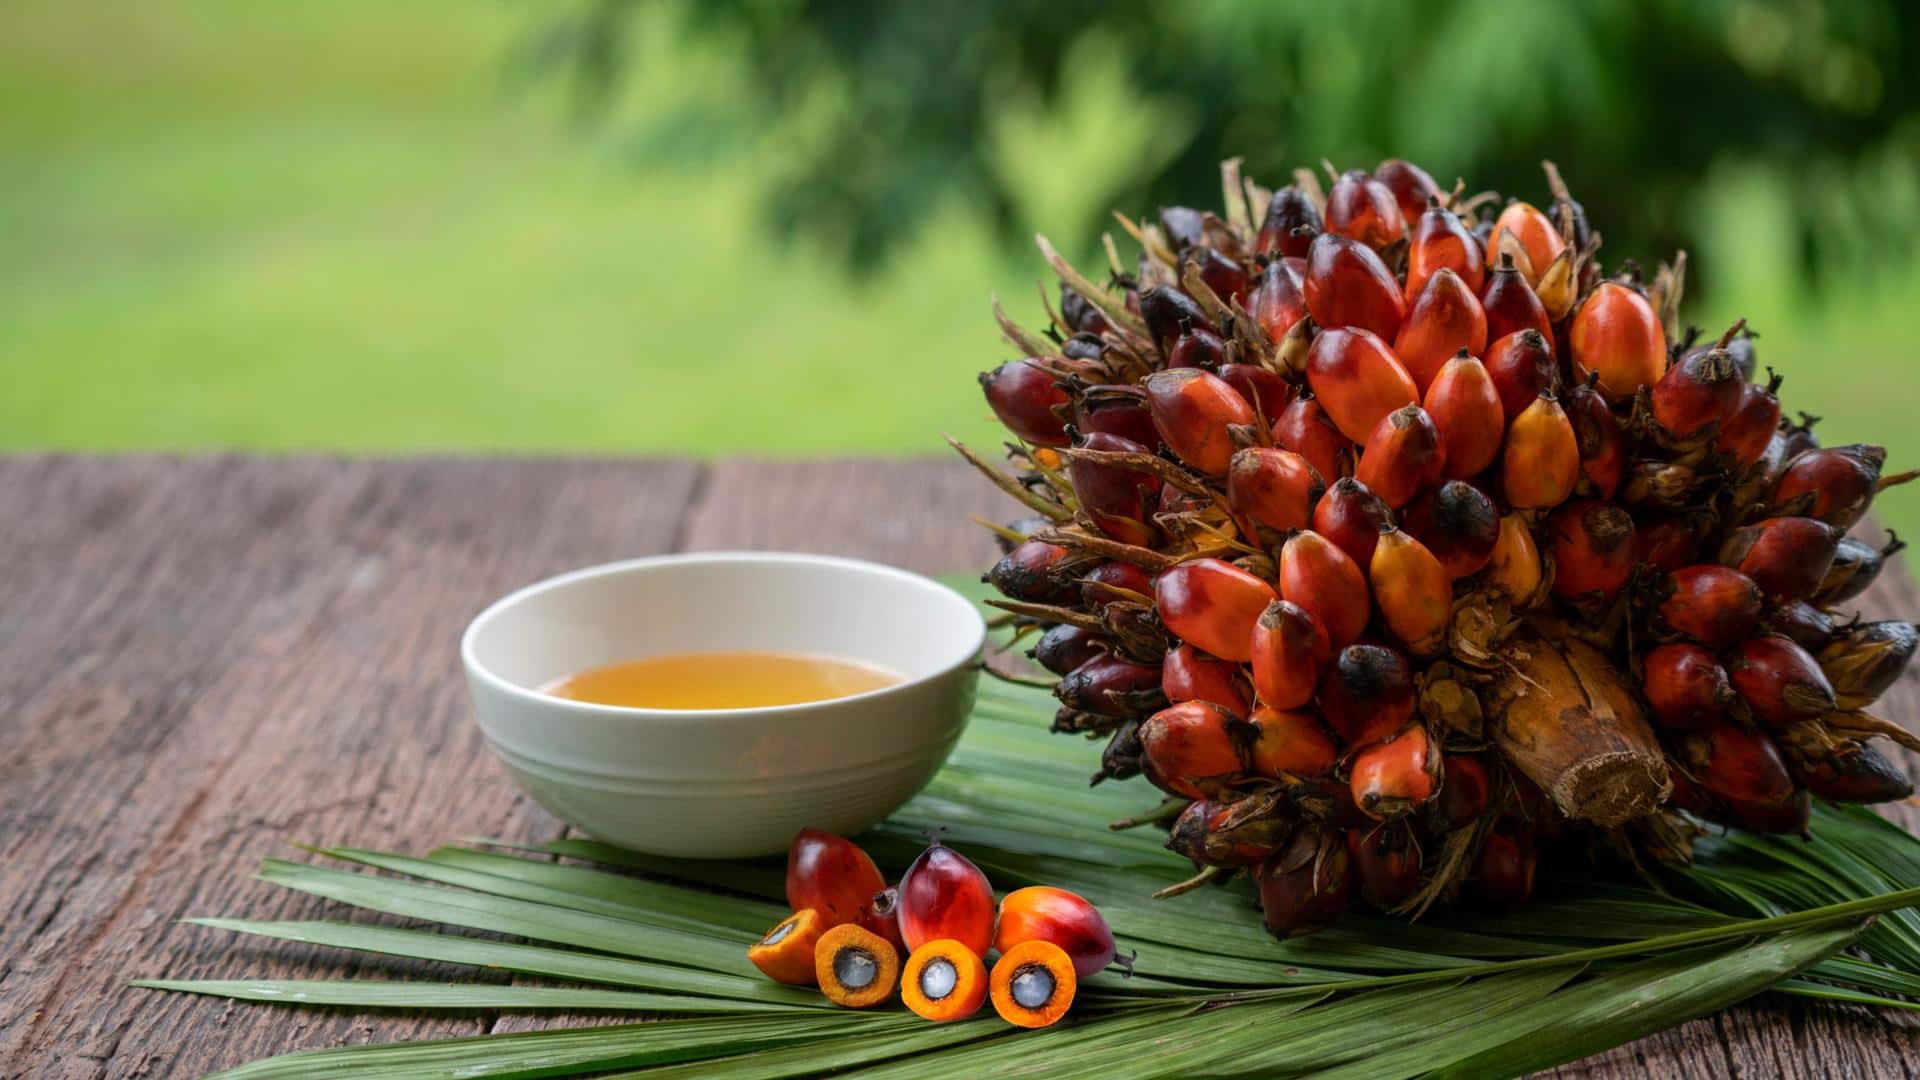 Did you know these powerful health benefits of palm oil